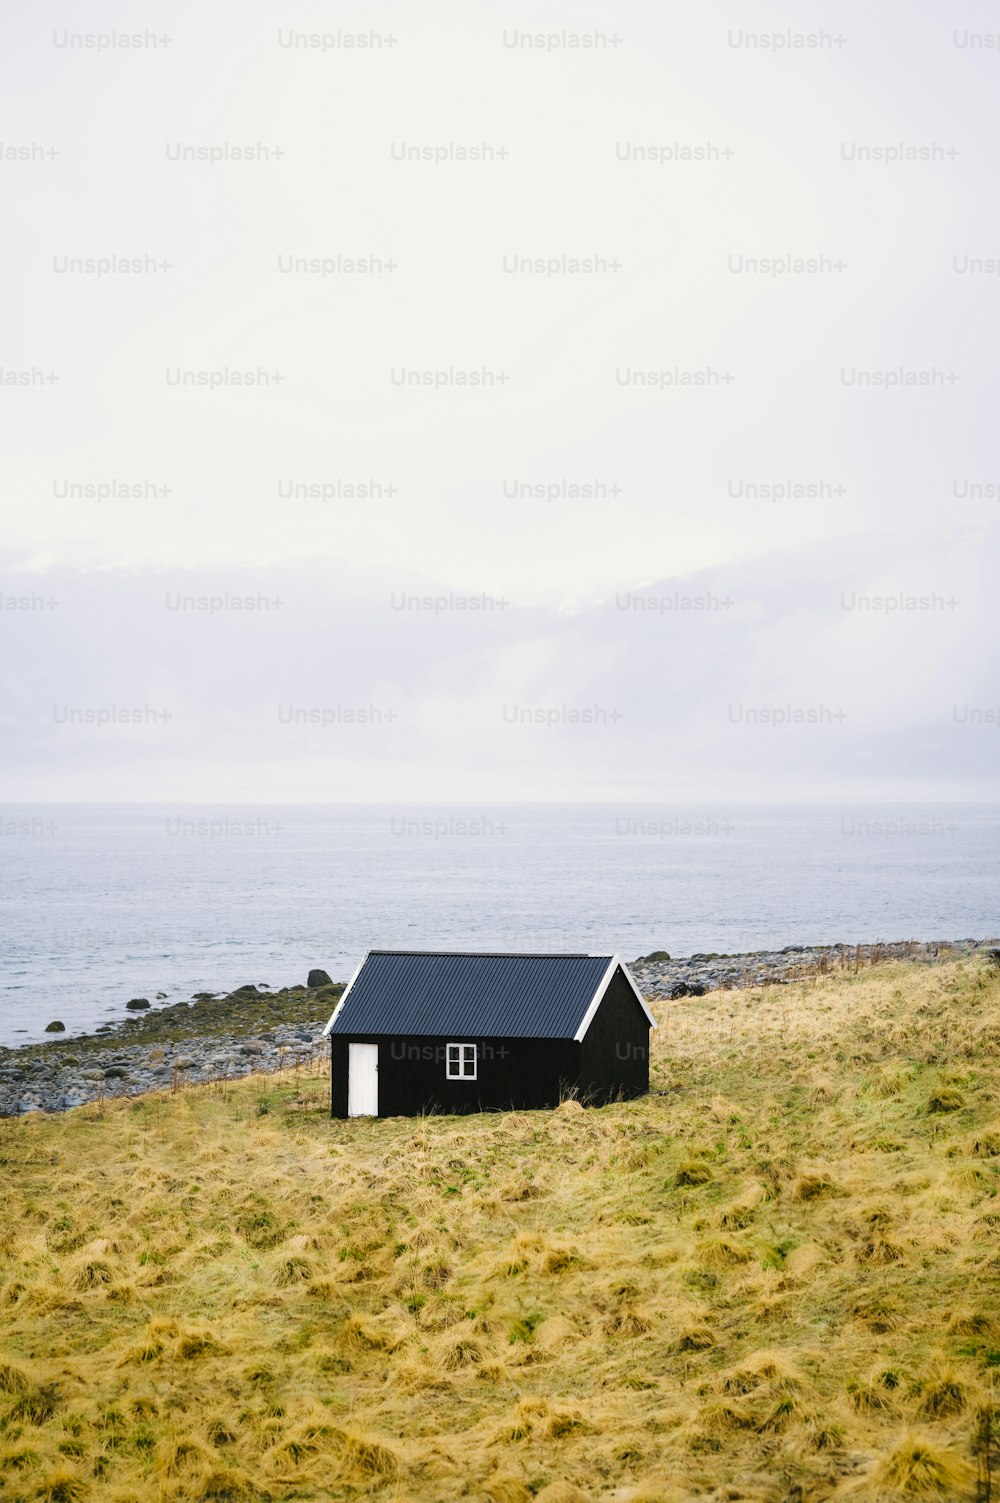 a small black house sitting on top of a grass covered field